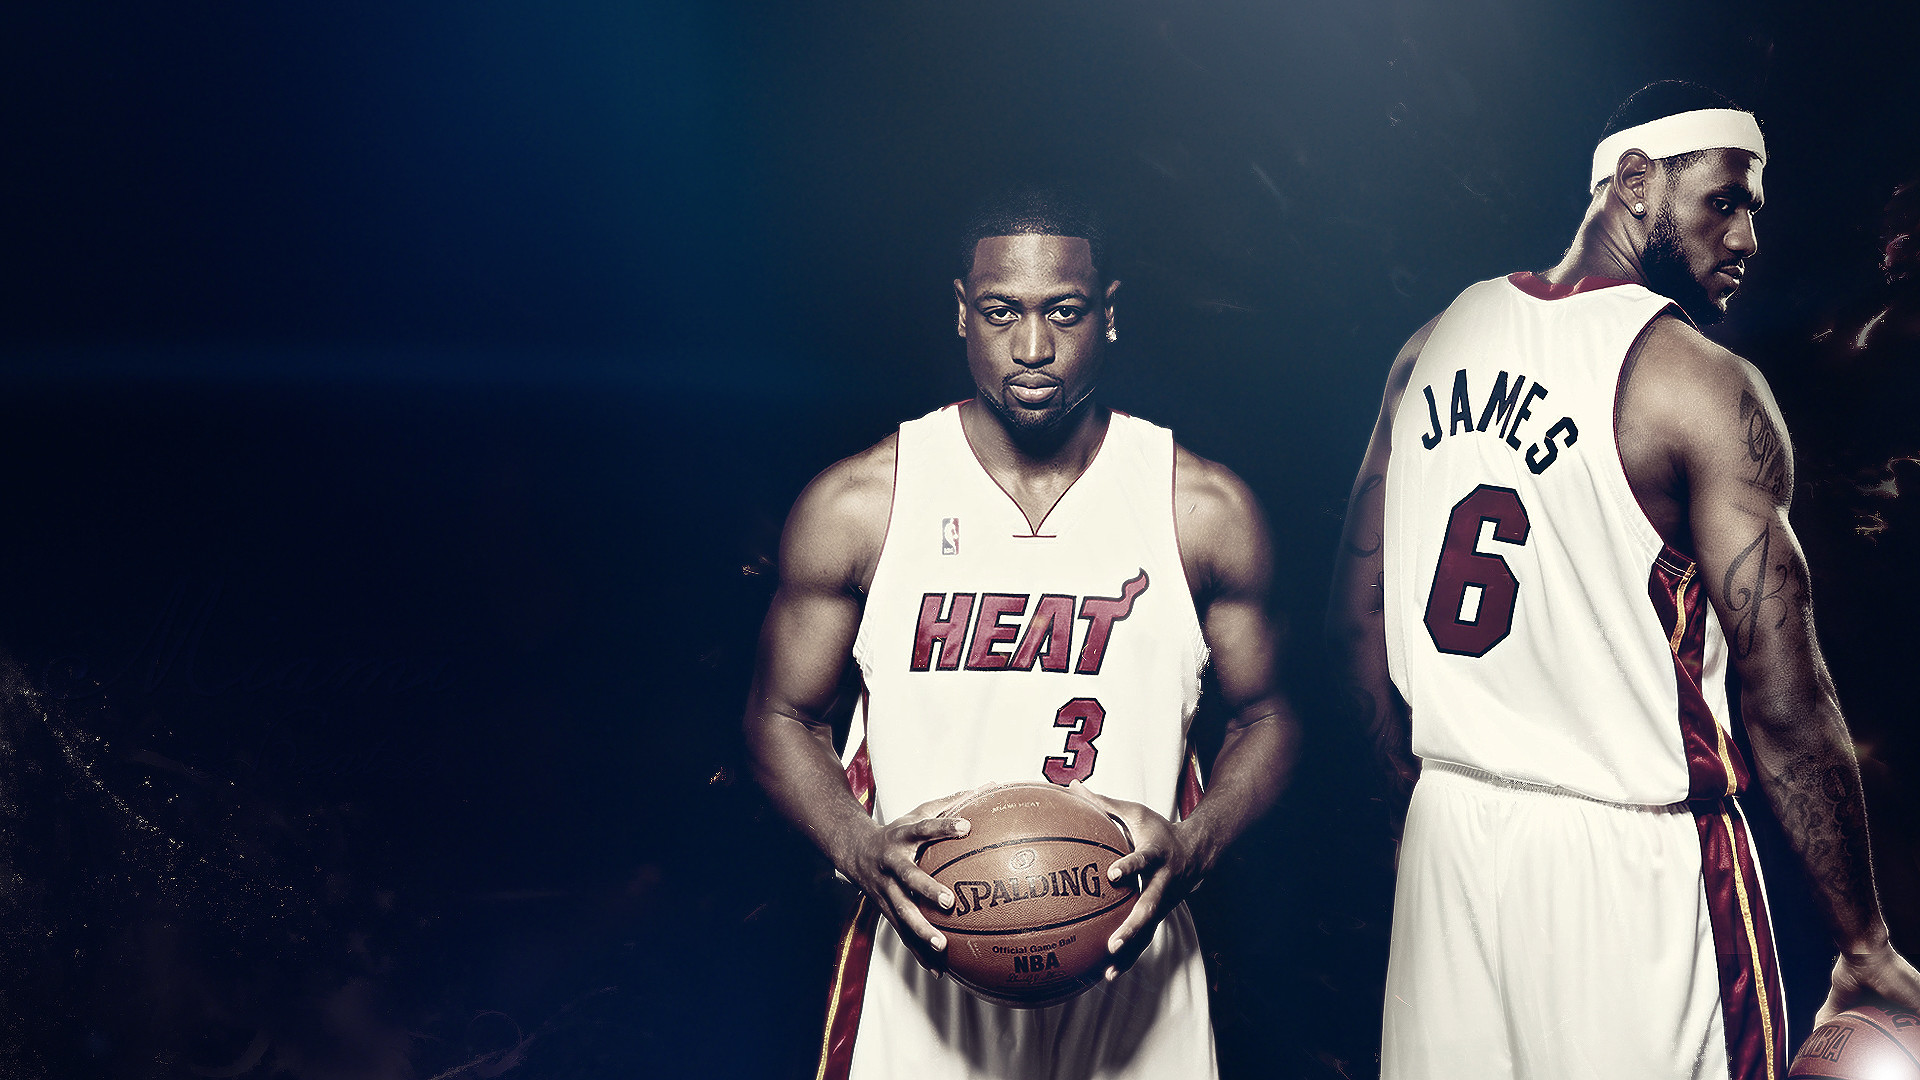 1920x1080 Collection of Basketball Player Wallpapers on HDWallpapers 960Ã658 NBA  Players Wallpapers (52 Wallpapers